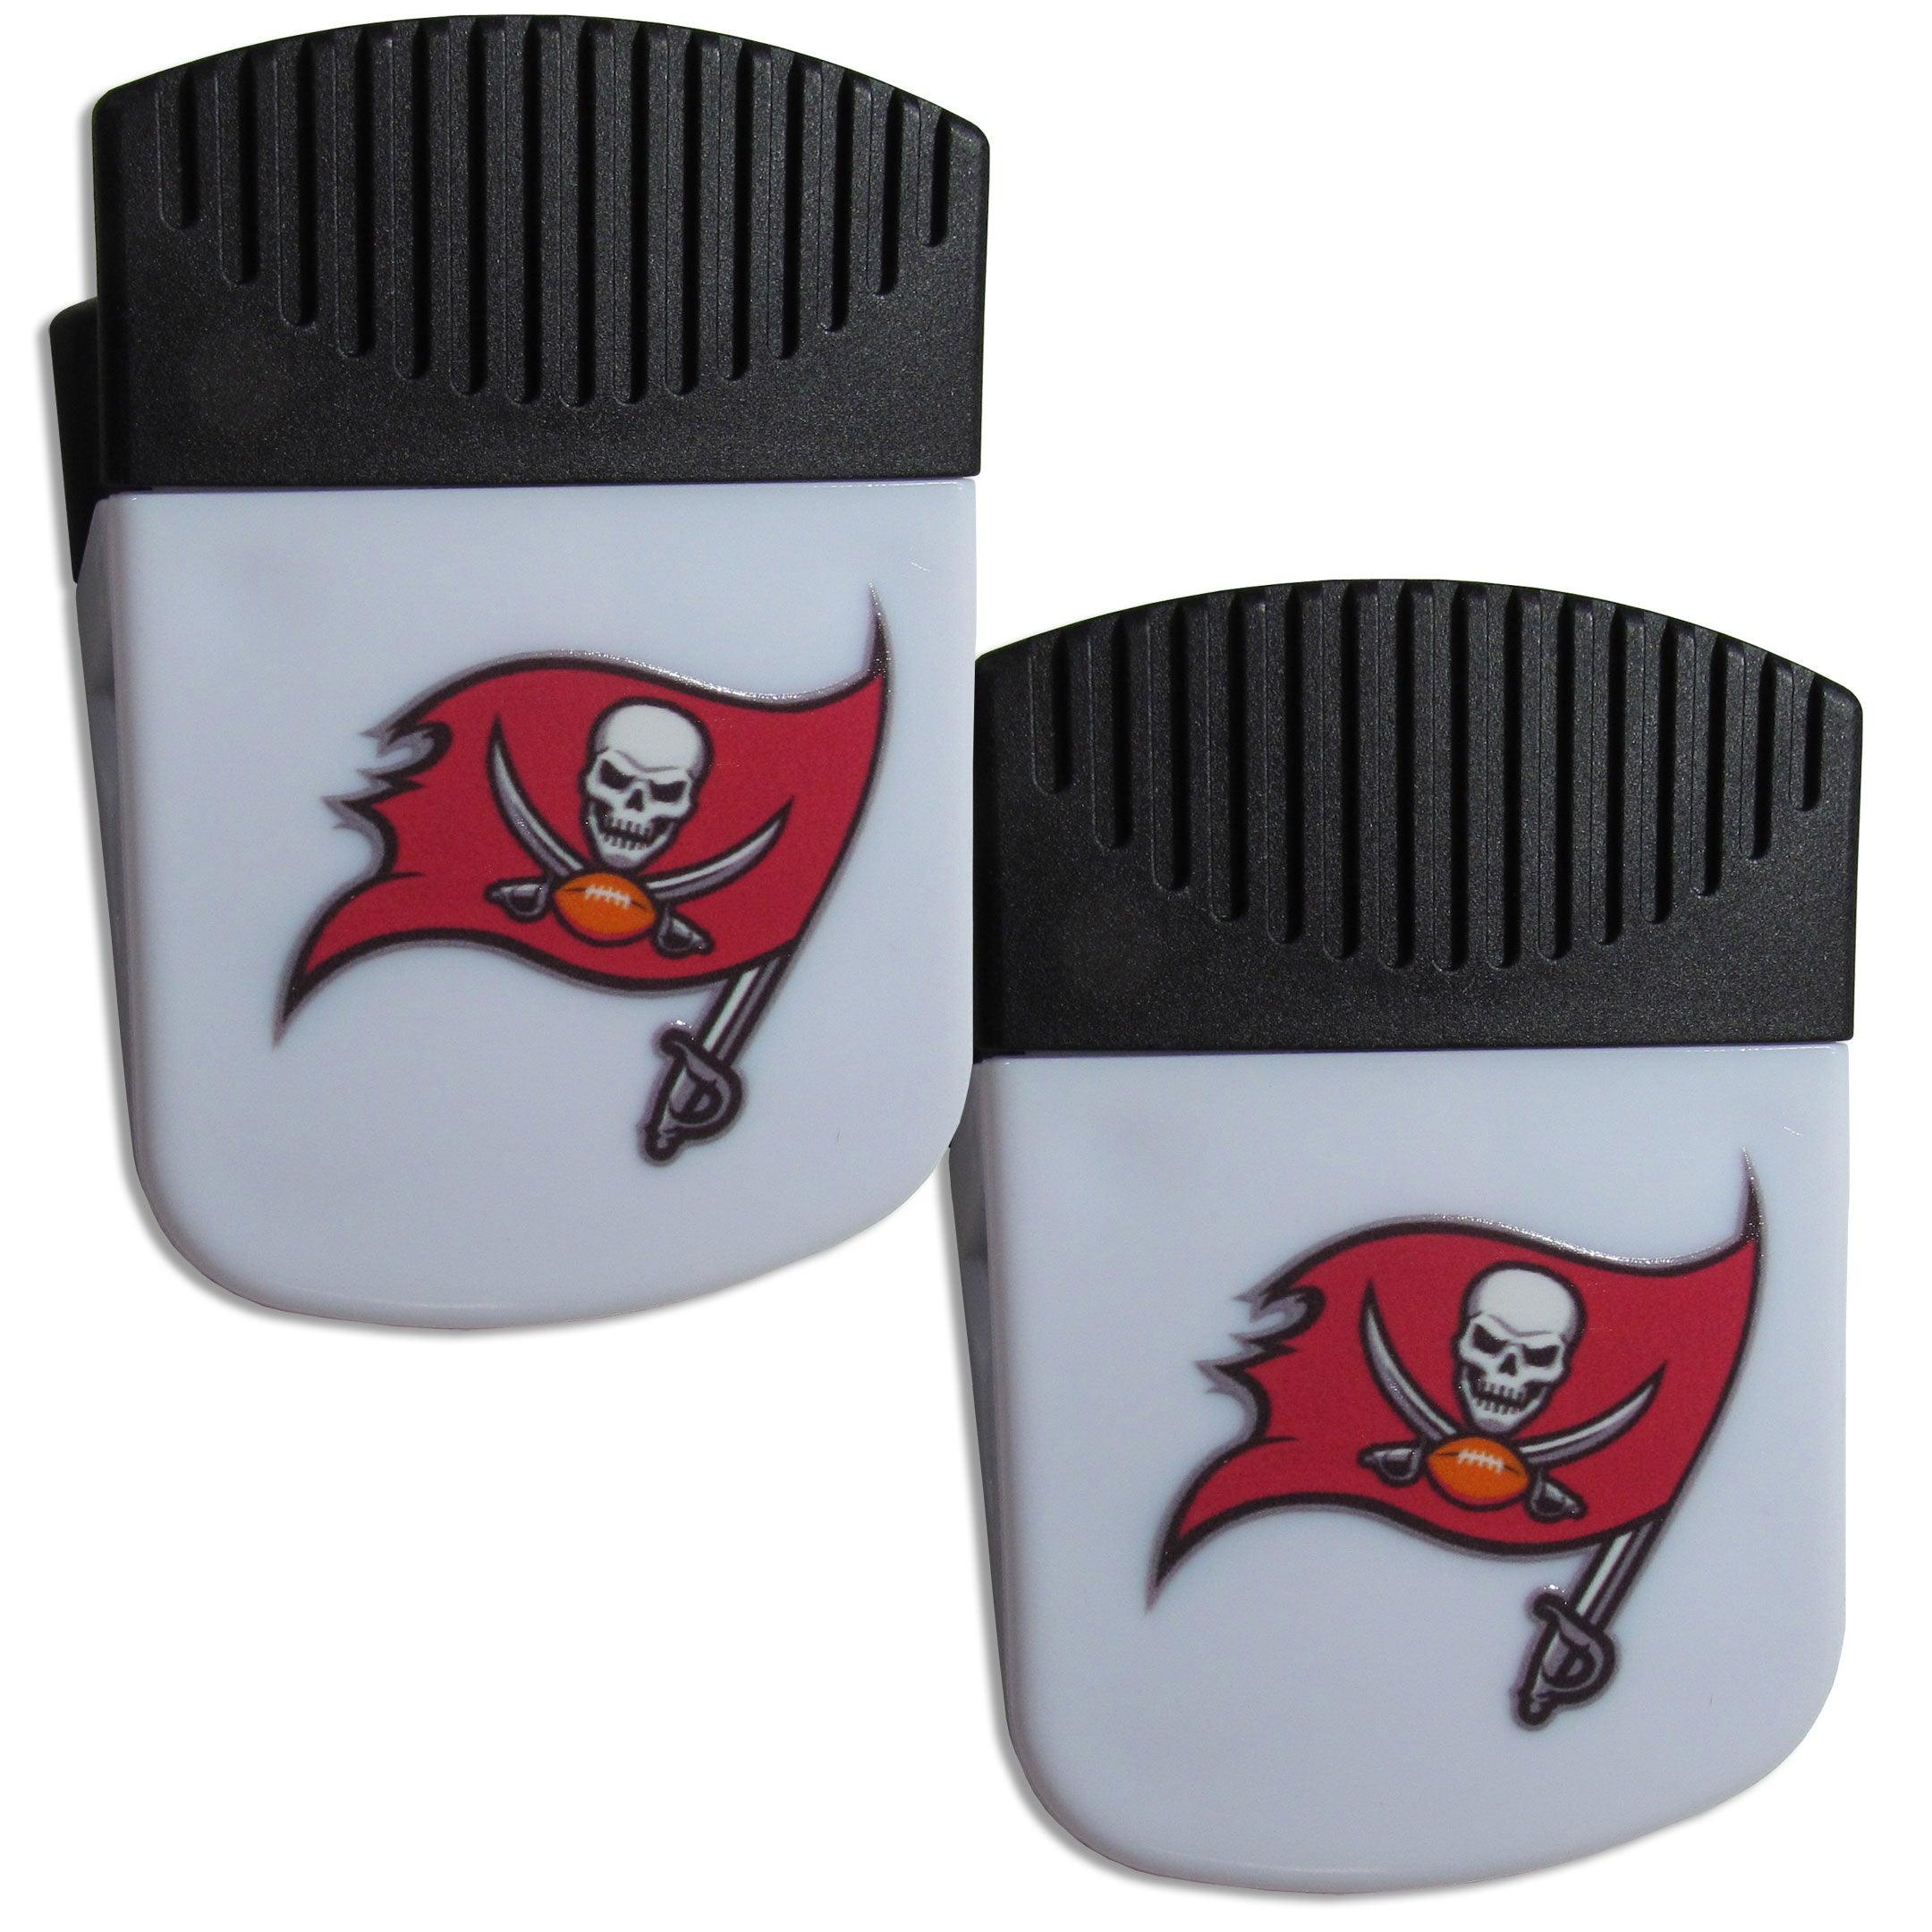 Tampa Bay Buccaneers Chip Clip Magnet with Bottle Opener, 2 pack - Flyclothing LLC